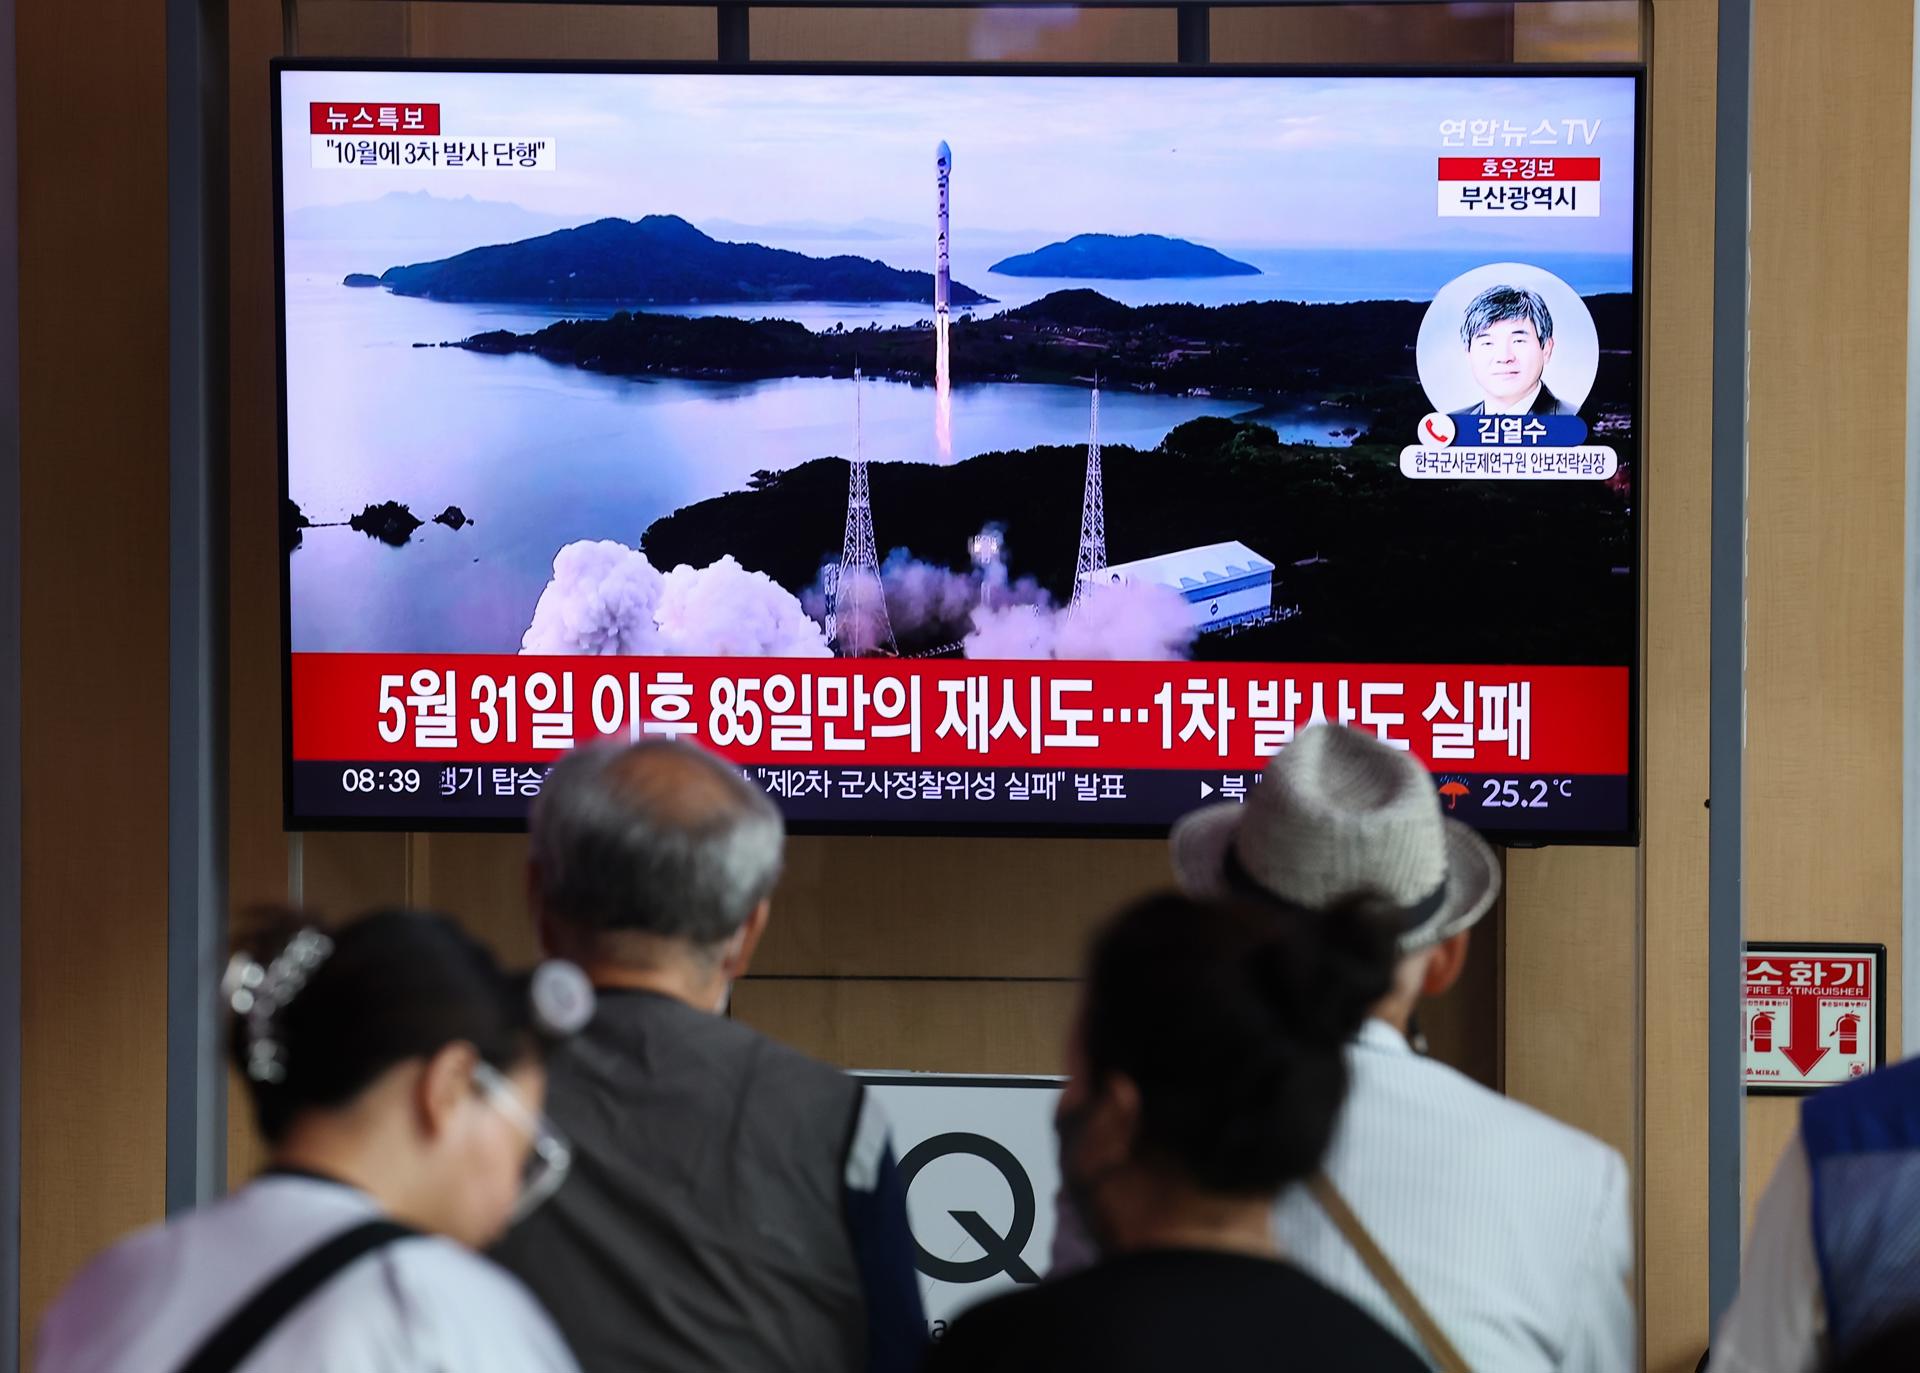 People watch a TV report on North Korea's botched space rocket launch at Seoul Station in Seoul, South Korea, 24 August 2023. Earlier in the day, the North's official Korean Central News Agency said its second launch of a 'military reconnaissance satellite' from the Tongchang-ri area failed due to an error in the emergency blasting system during the third-stage flight. EFE-EPA/YONHAP SOUTH KOREA OUT